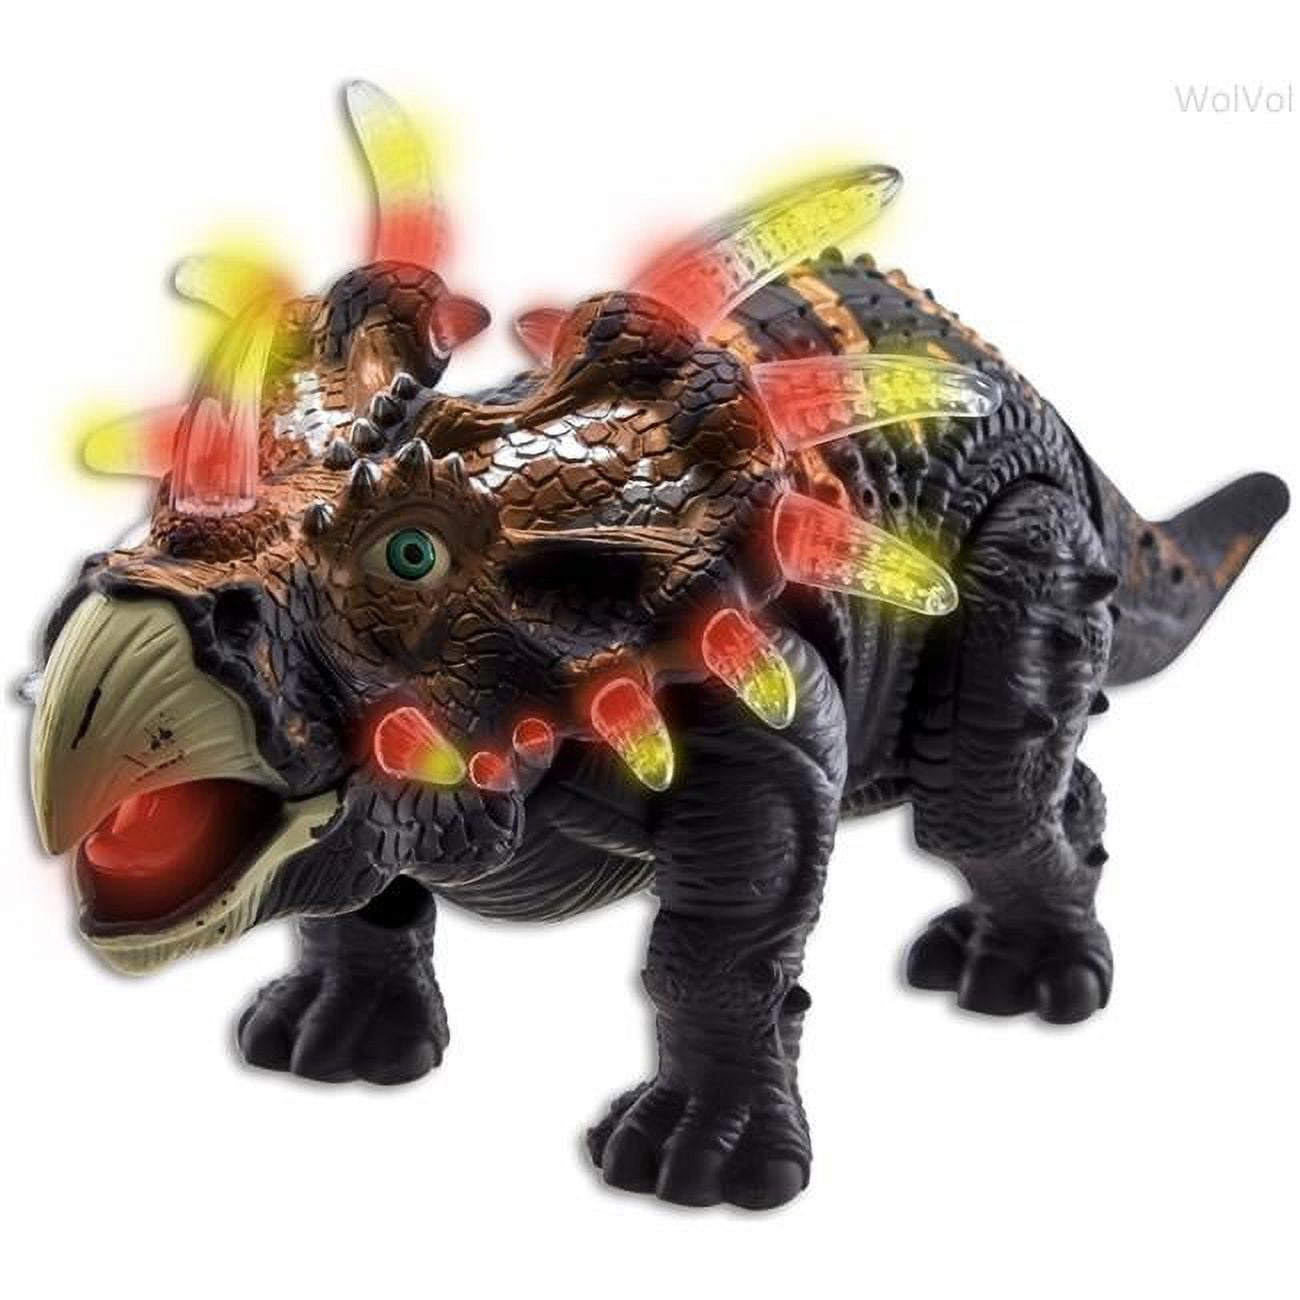 Picture of Azimport D632 Gray Walking Triceratops Dinosaur Toy Figure - Grey